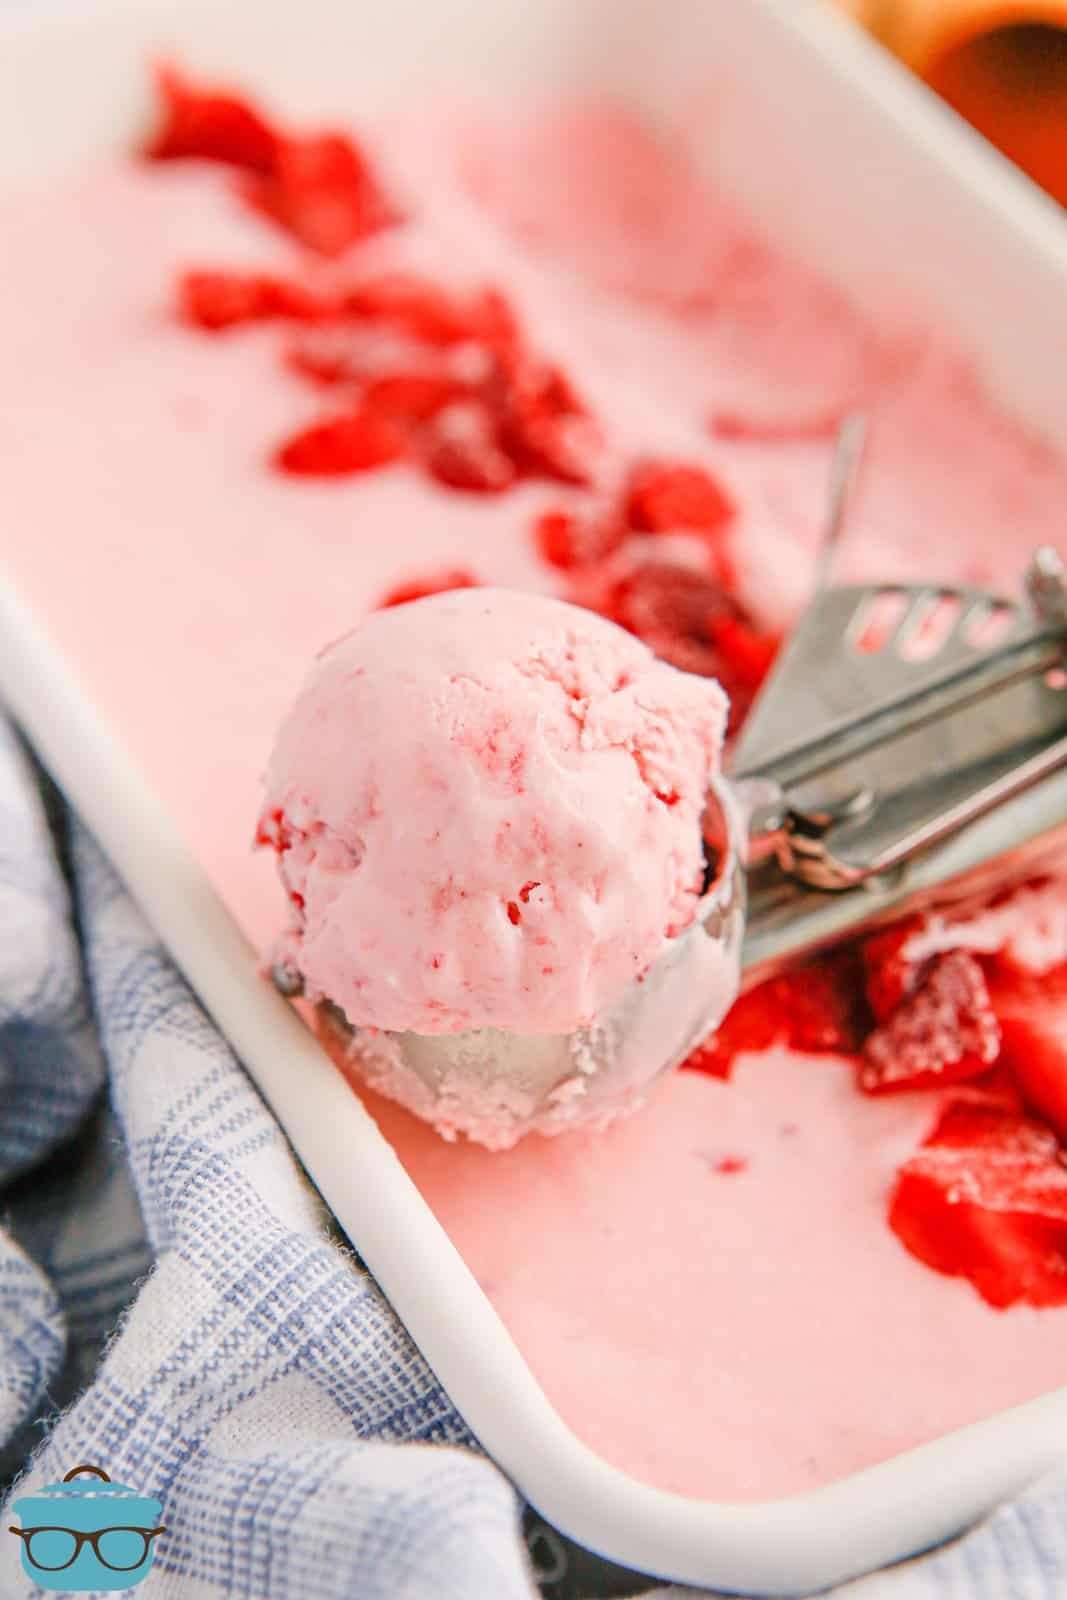 Ice cream scoop with a scoop of No-Churn Strawberry Ice Cream in pan with the rest of ice cream.